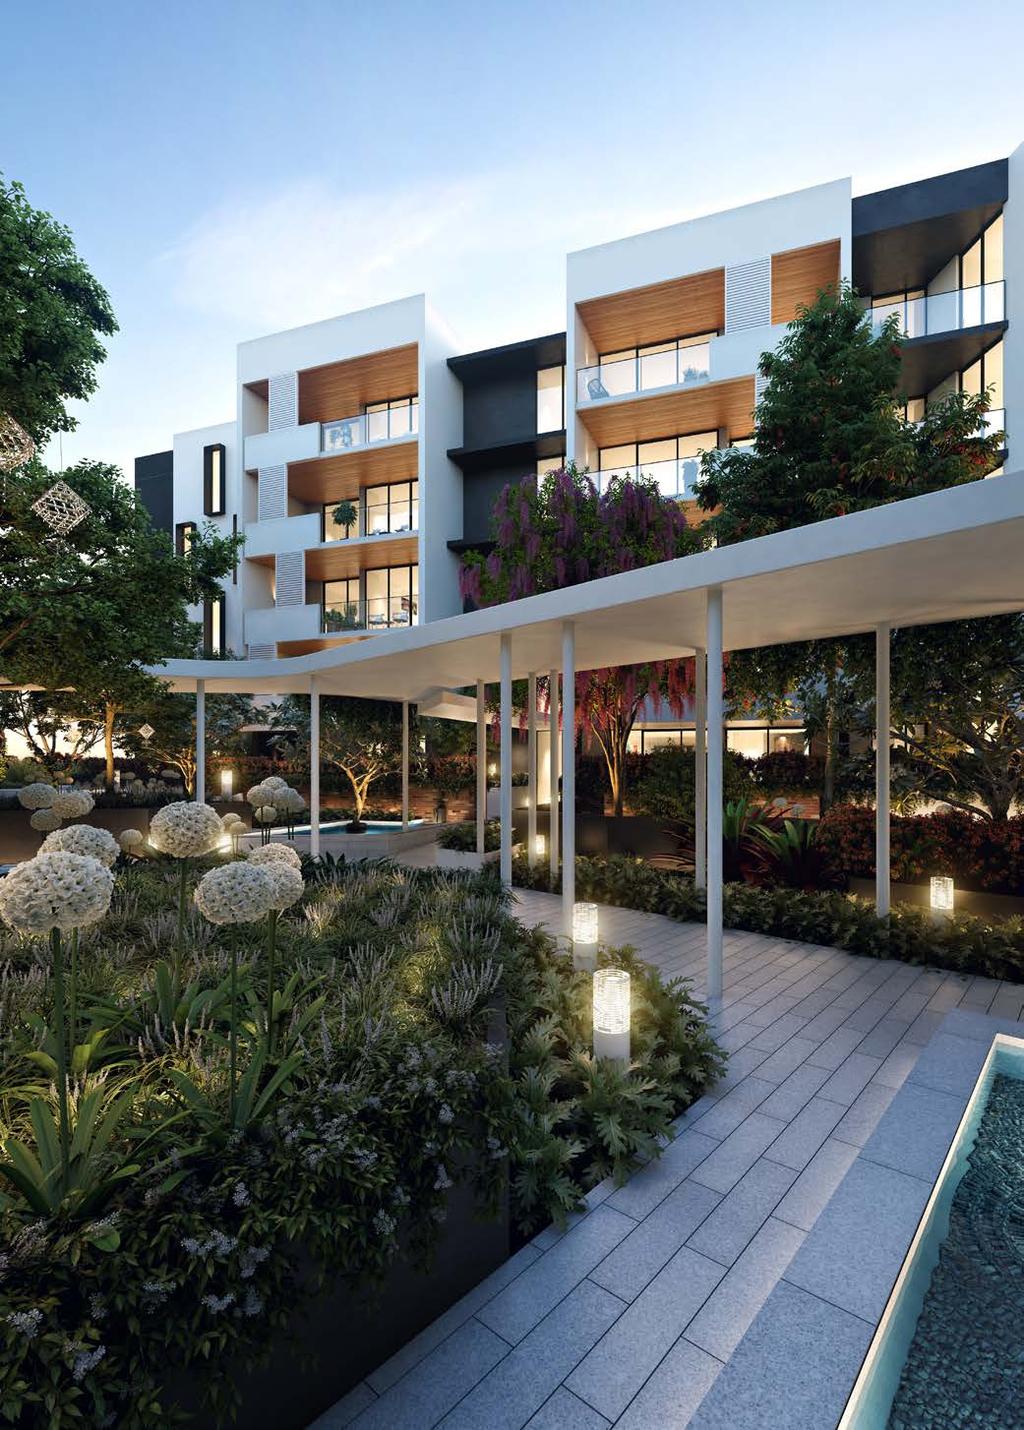 Residents Gardens The Essence of Luxury Join the privileged few who will call Essence home, and you will share a special bond.